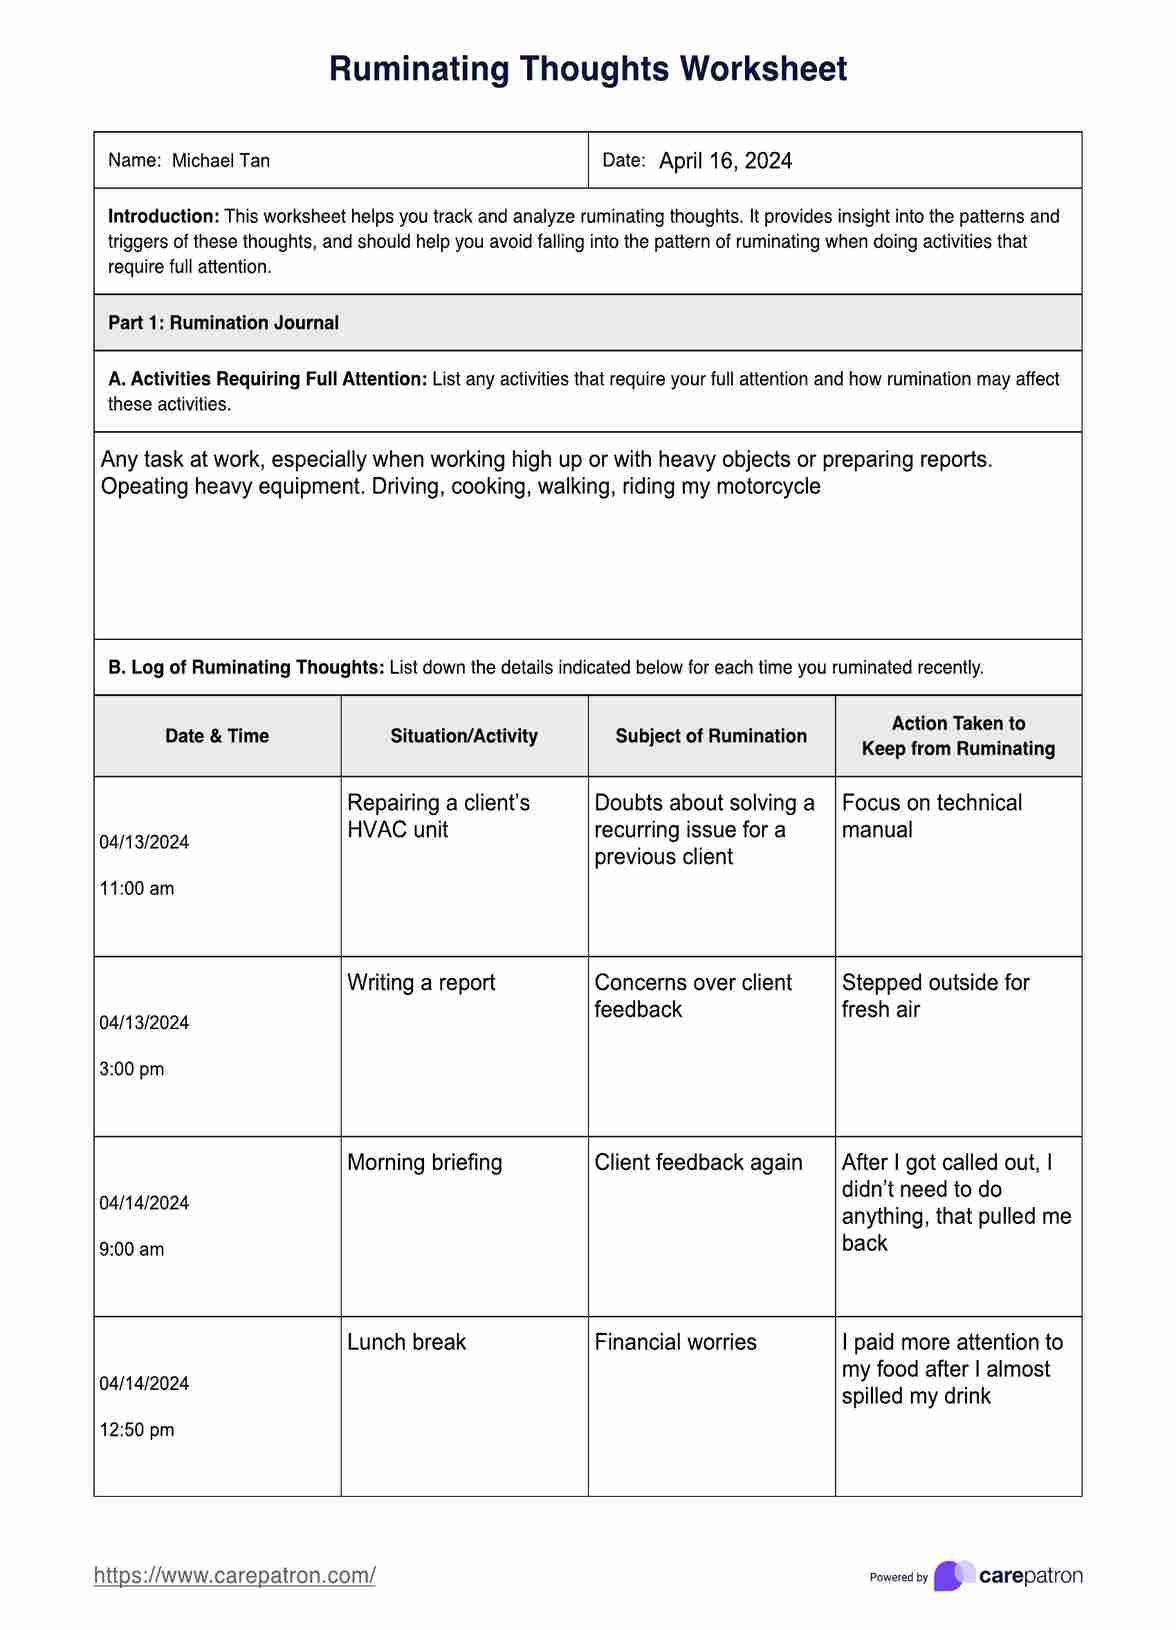 Ruminating Thoughts Worksheet PDF Example